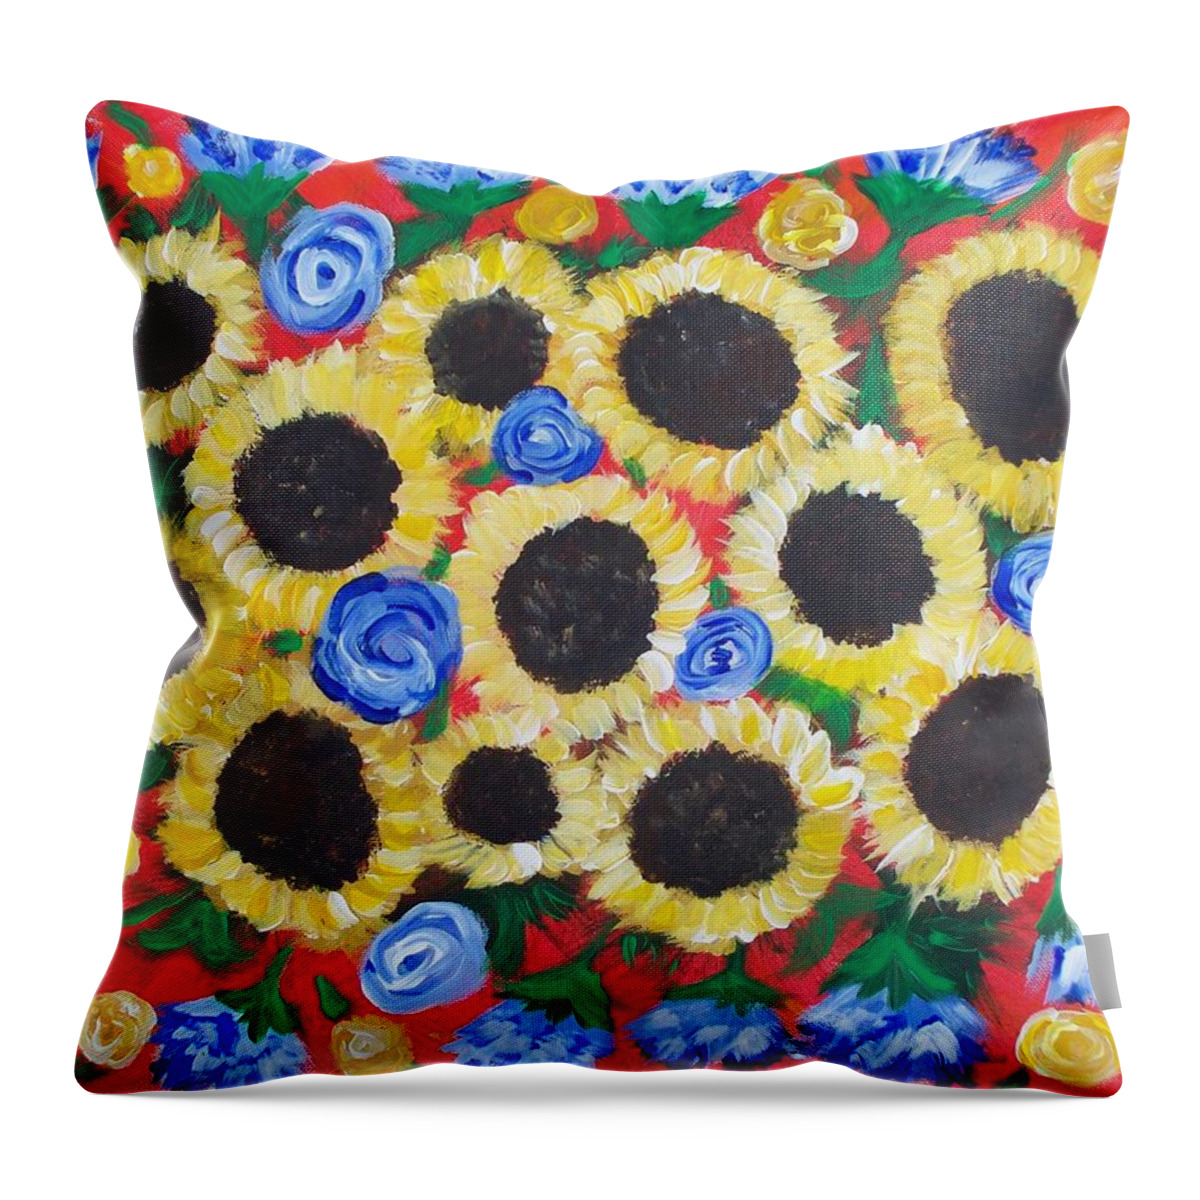 Flowers For Daddy Throw Pillow featuring the painting Flowers For Daddy by Seaux-N-Seau Soileau